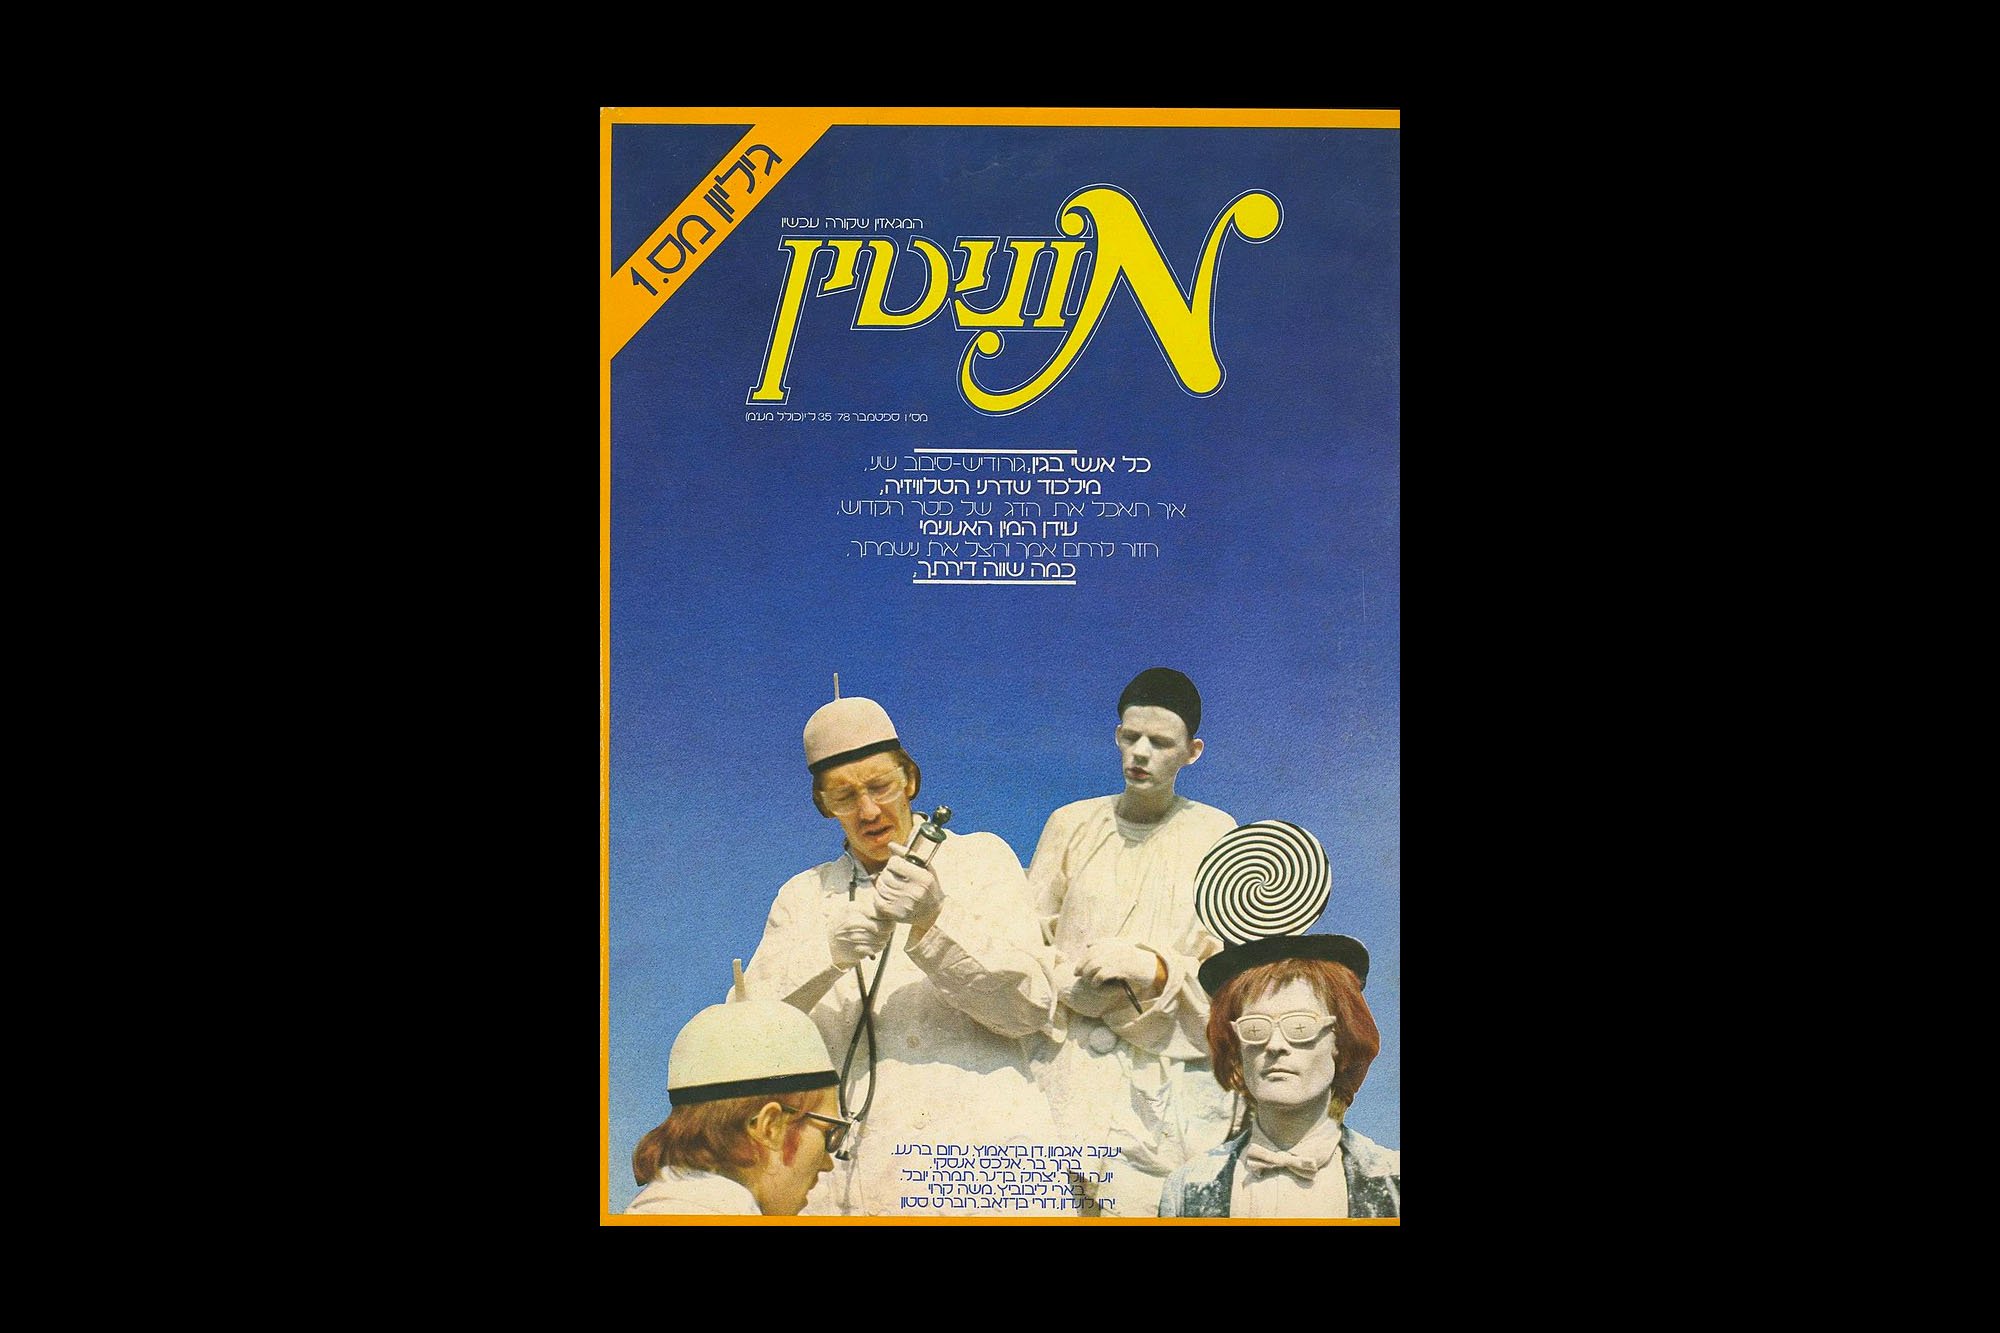  Monitin (Israeli Magazine) logo constructed with classic American typeface ITC Bookman letter bits 